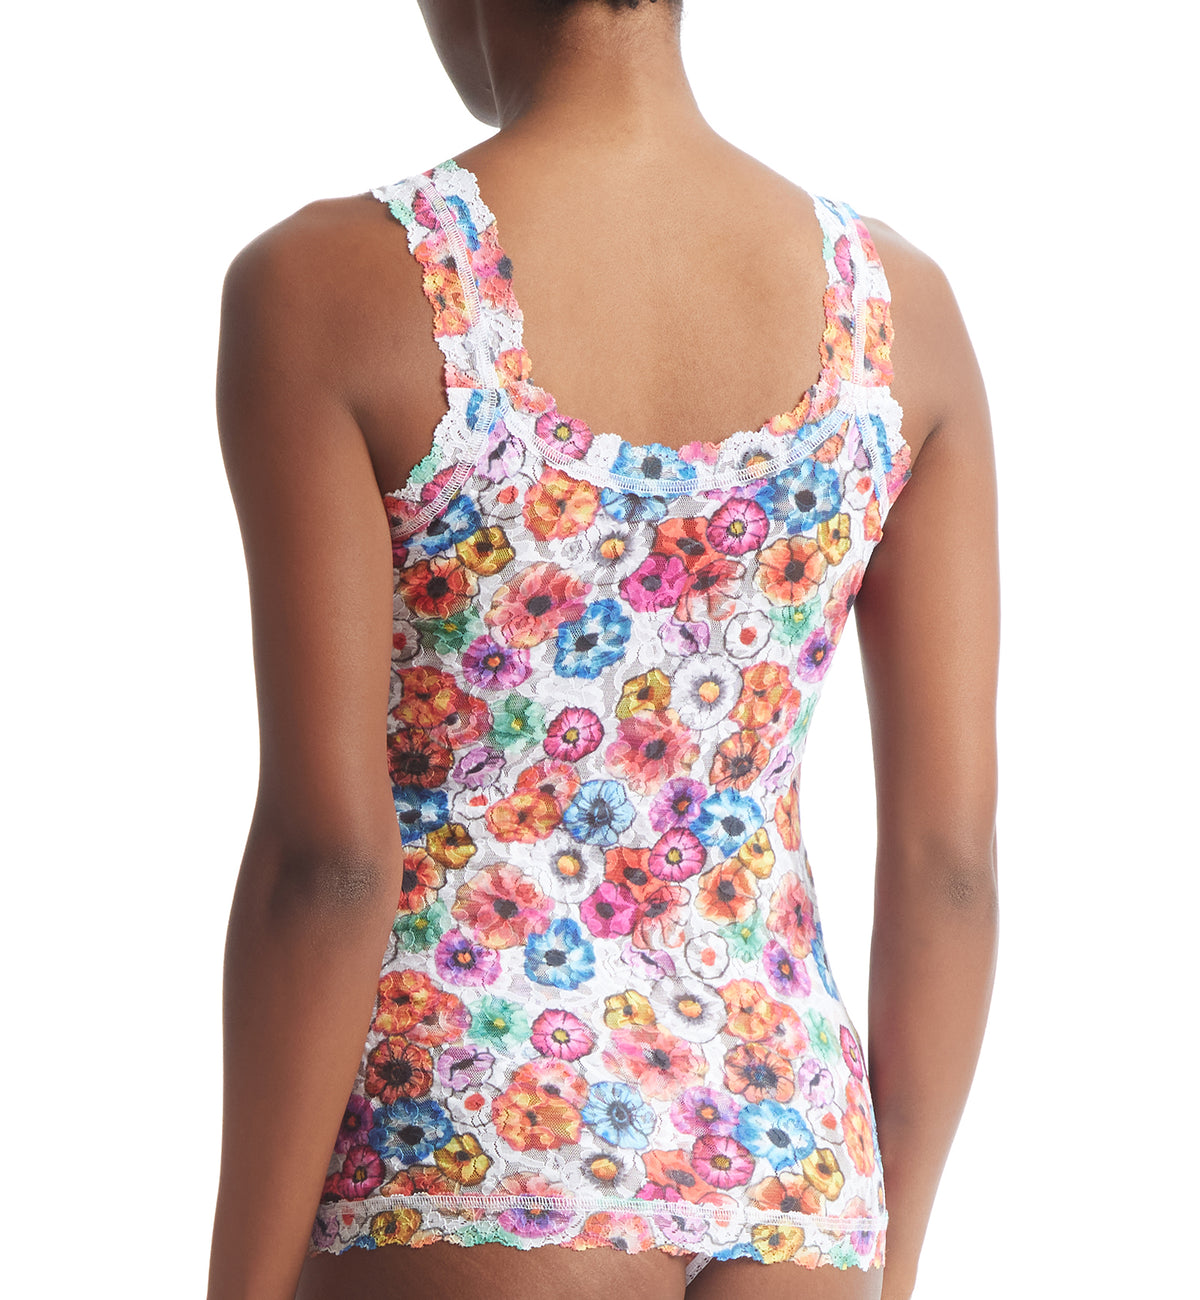 Hanky Panky Signature Lace Printed Unlined Camisole (PR1390L),XS,Linger Awhile - Linger Awhile,XS